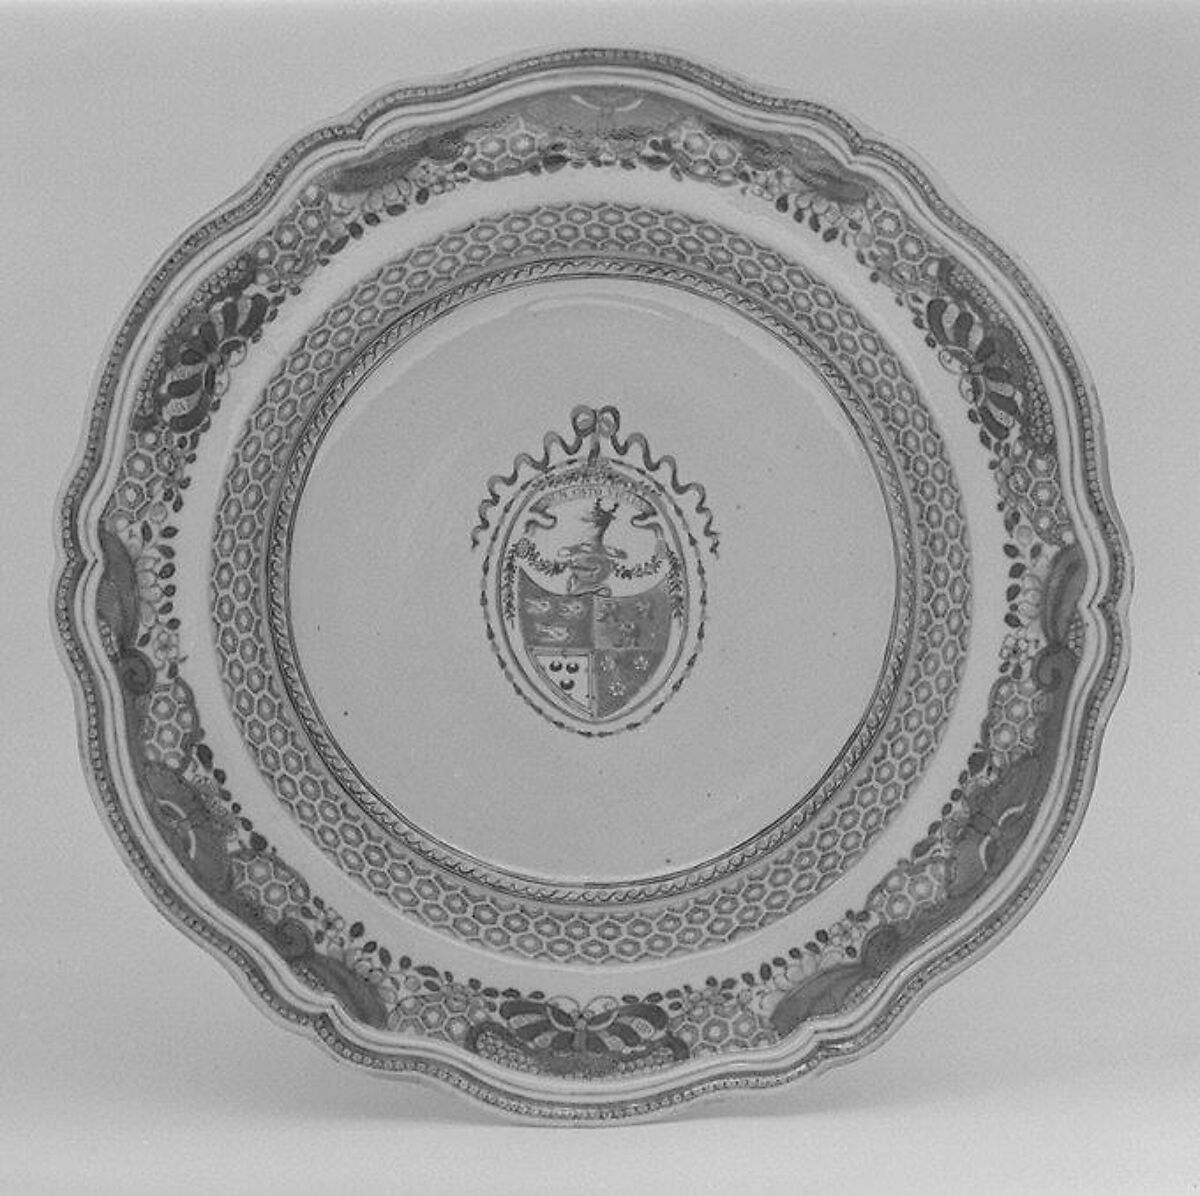 Soup plate, Hard-paste porcelain, Chinese, for British market 